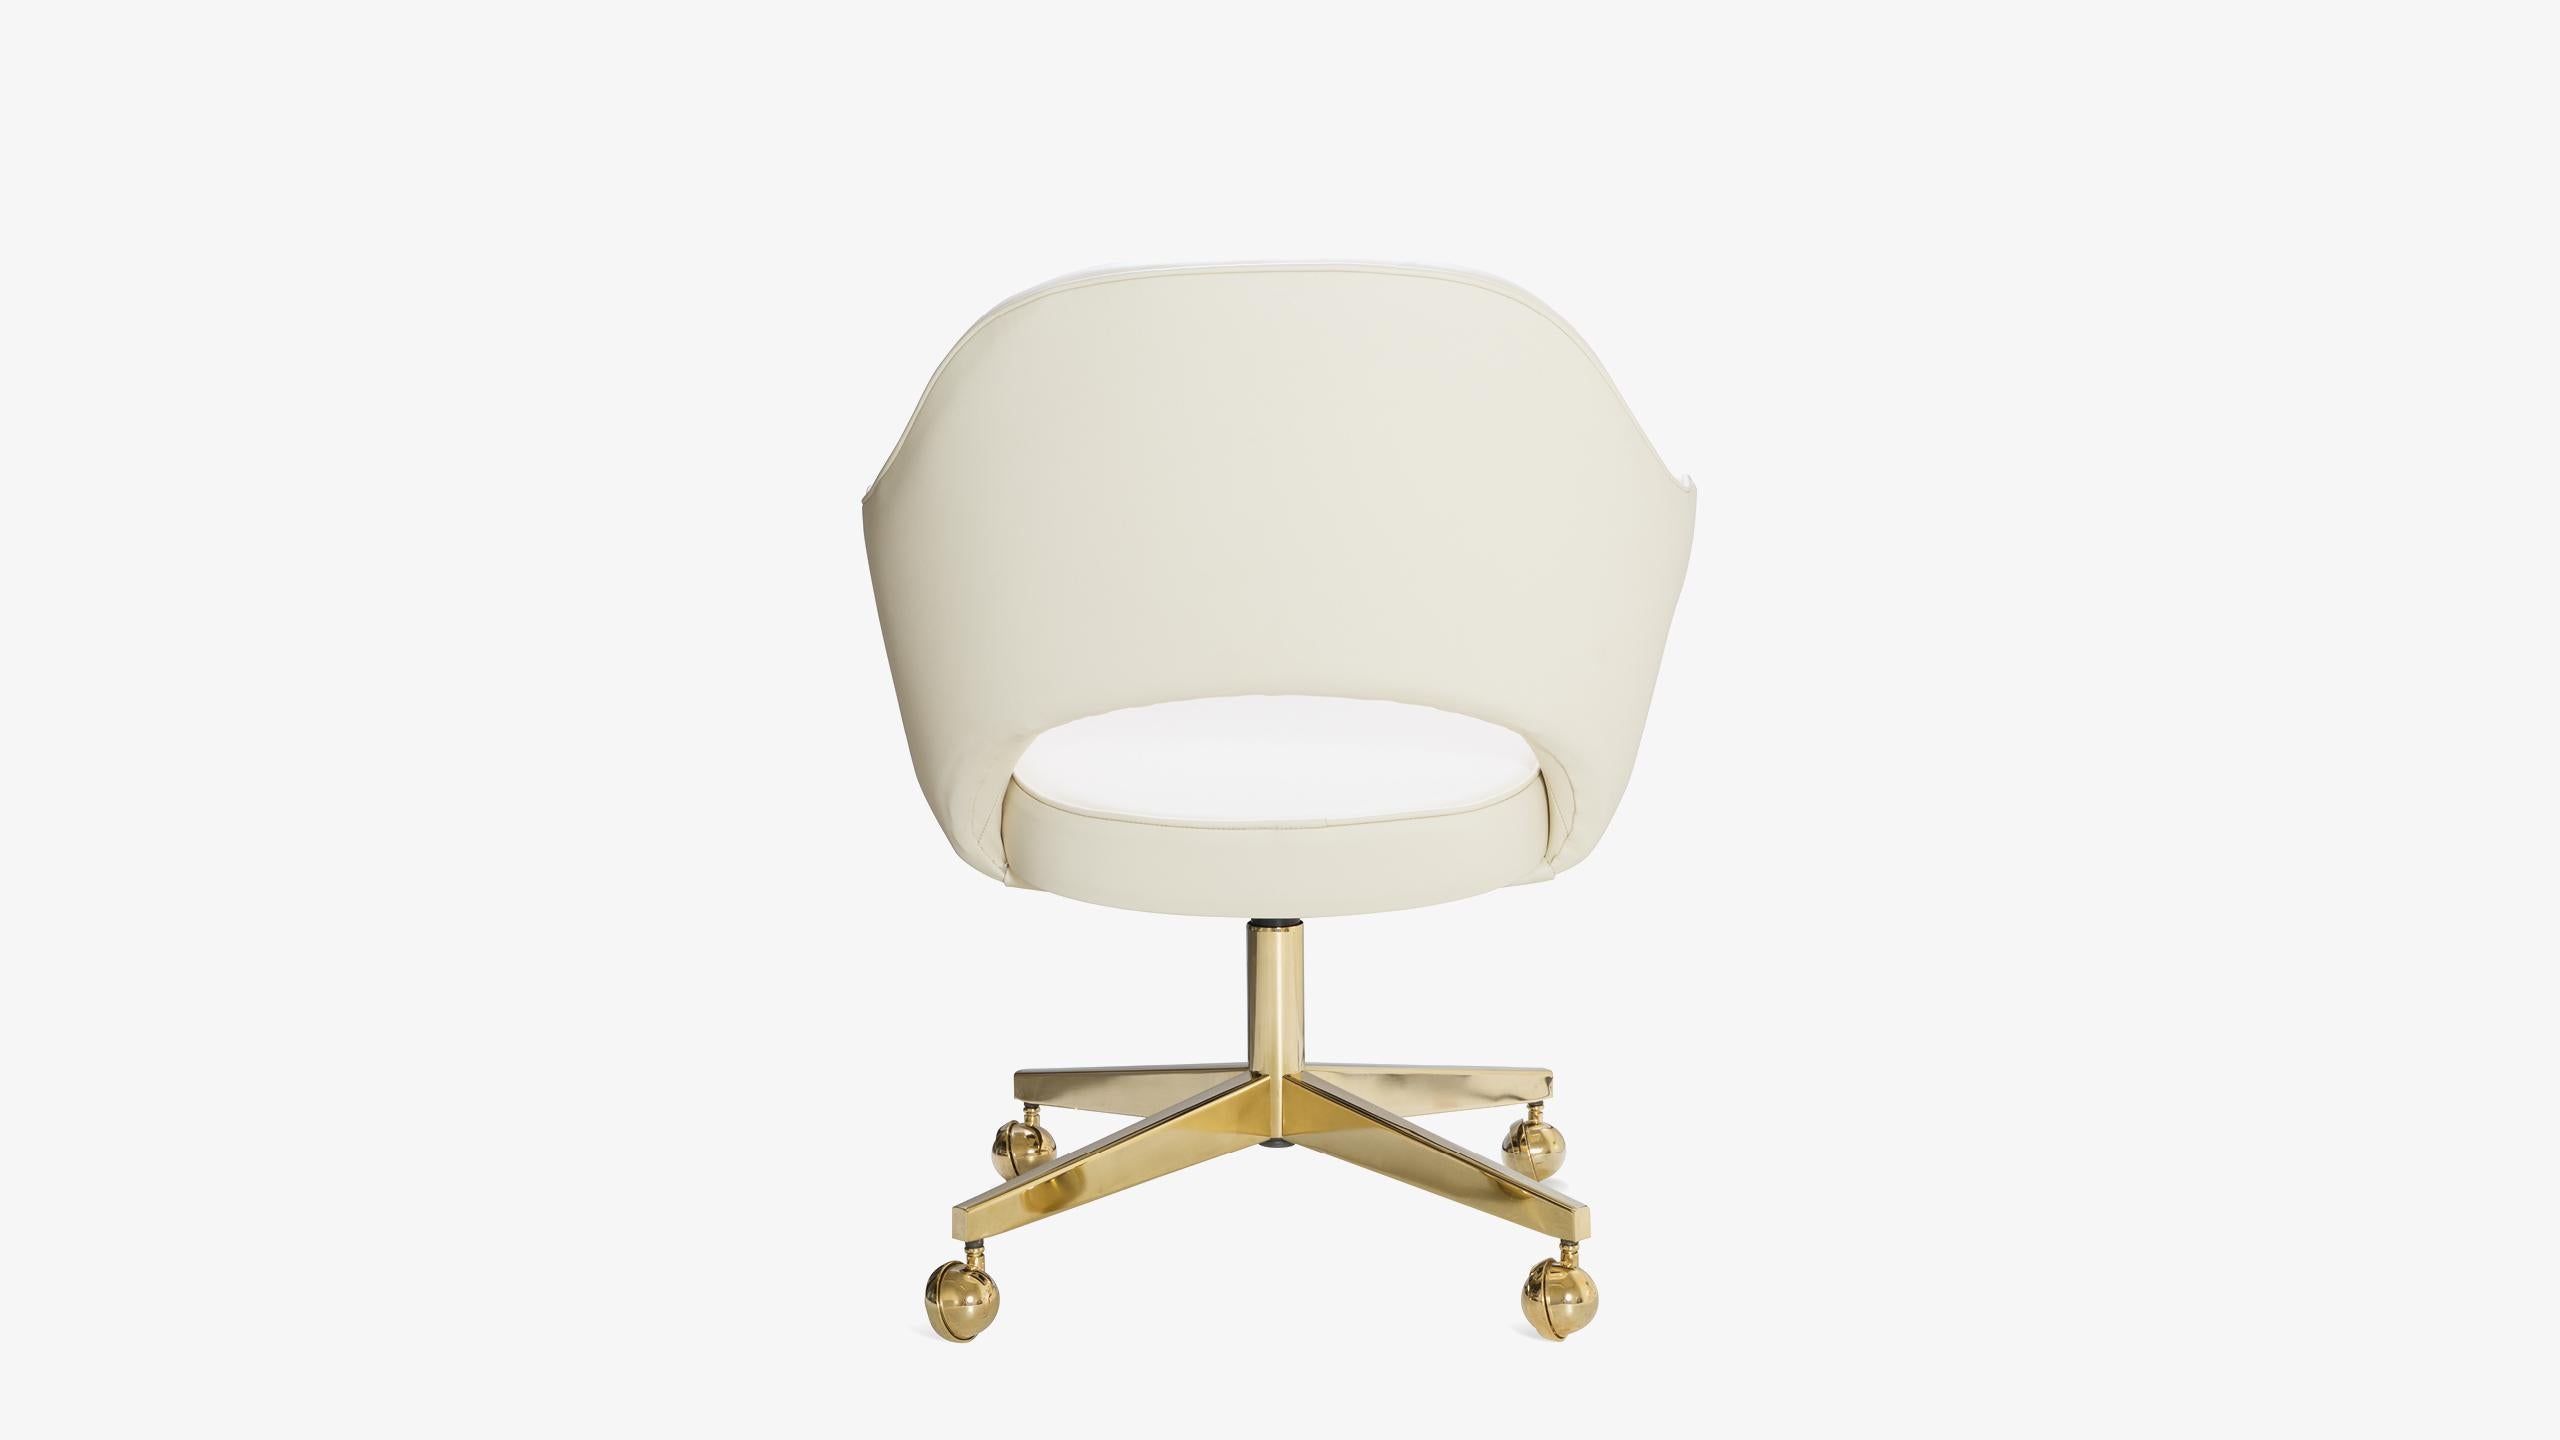 Plated Saarinen Executive Armchair in Creme Leather, Swivel Base, Gold Edition